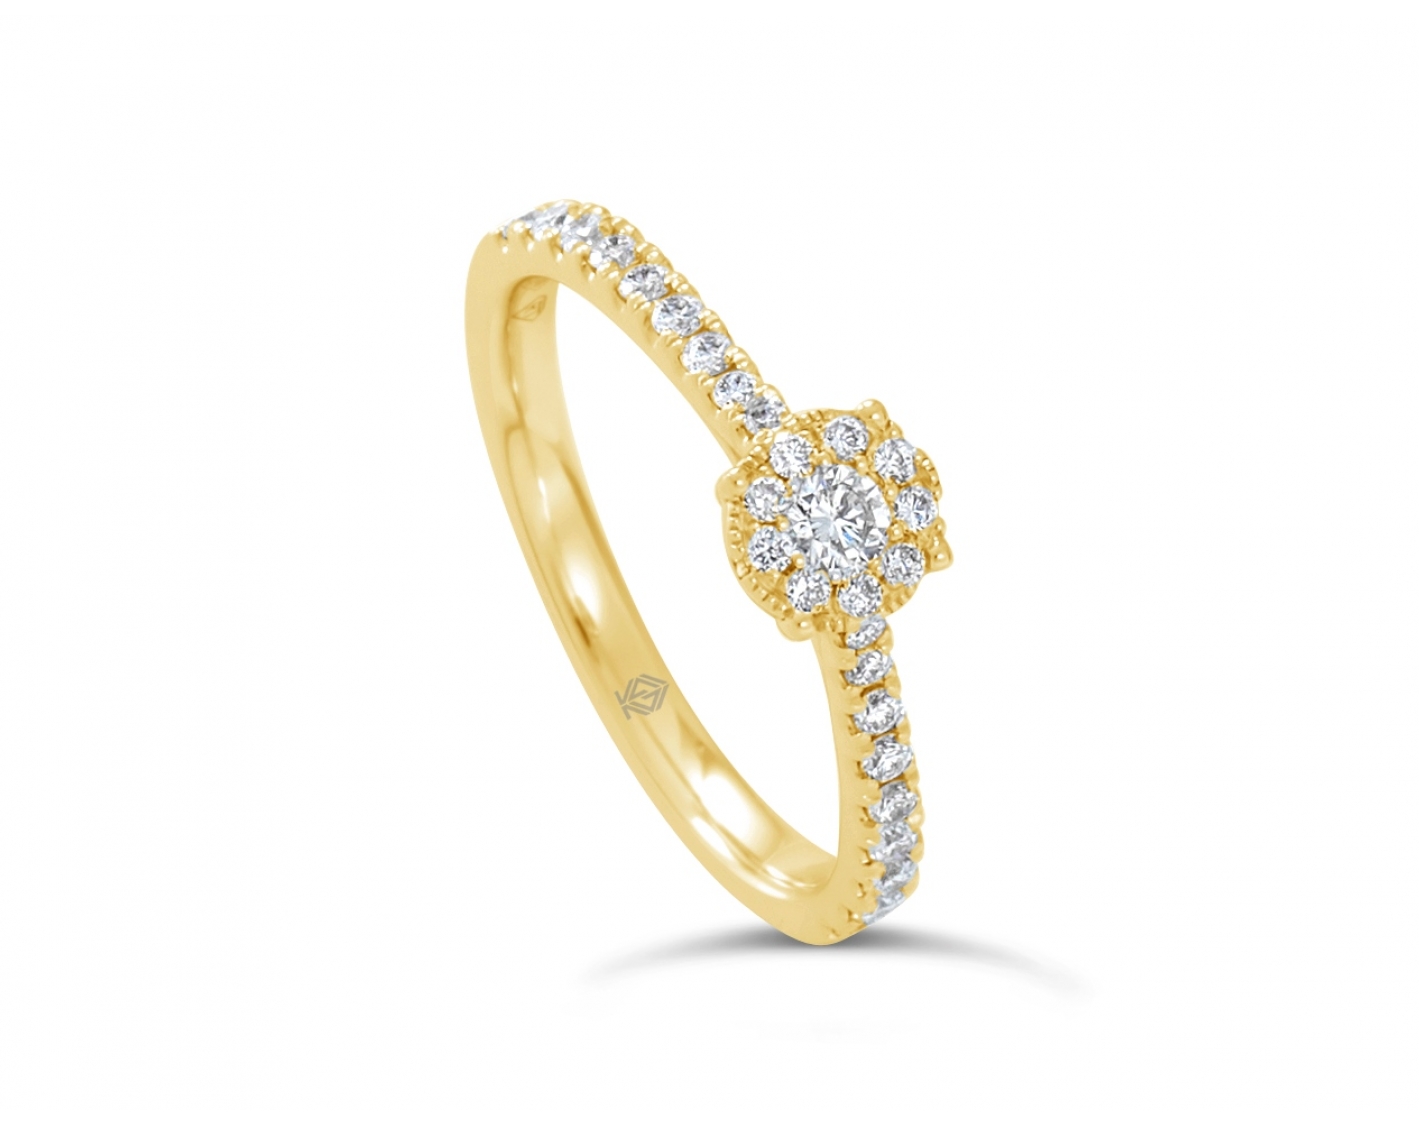 18k yellow gold cathedral halo illusion set engagement ring with round pave set sidestones Photos & images